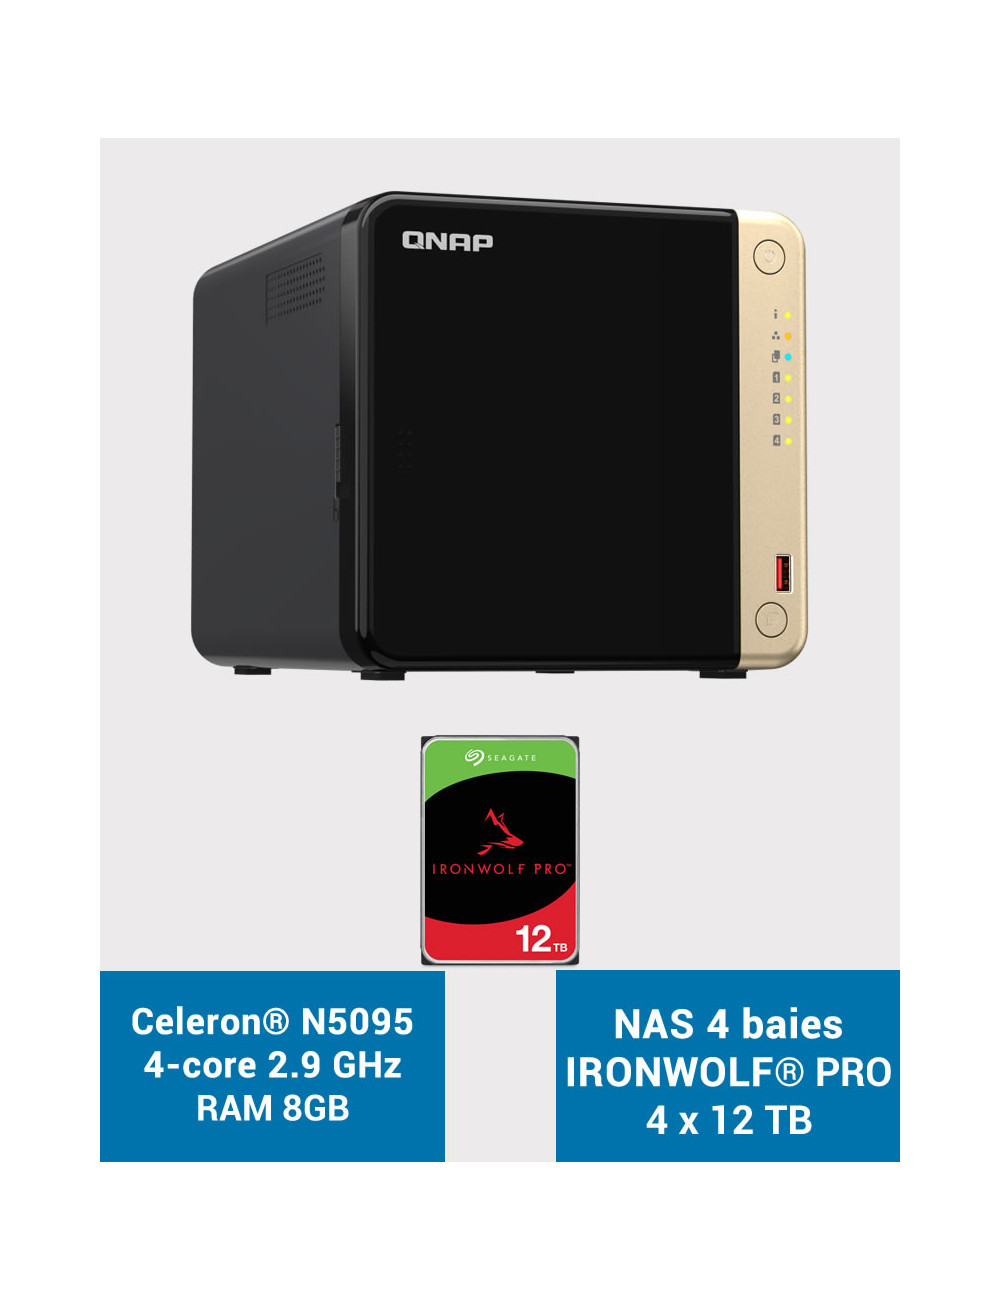 QNAP TS-464 8GB Serveur NAS 4 baies IRONWOLF PRO 48To (4x12To)